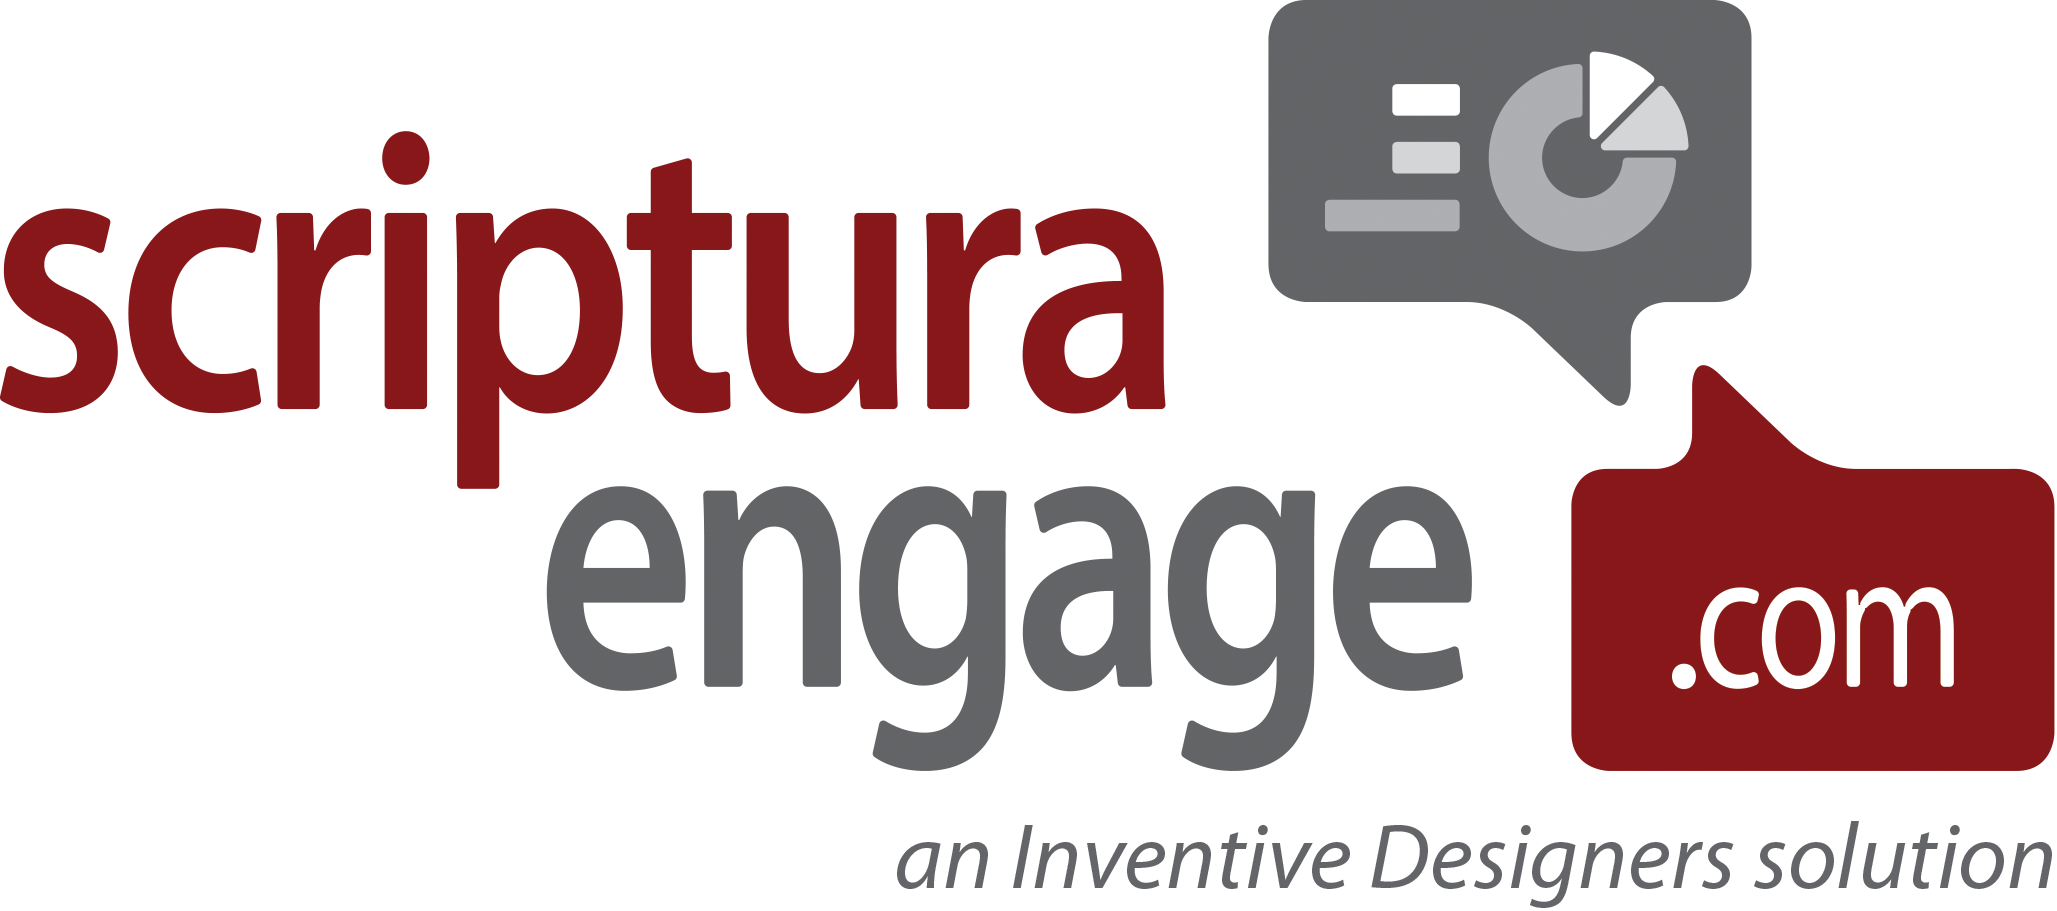 Scriptura Engage and 2Mware announce partnership